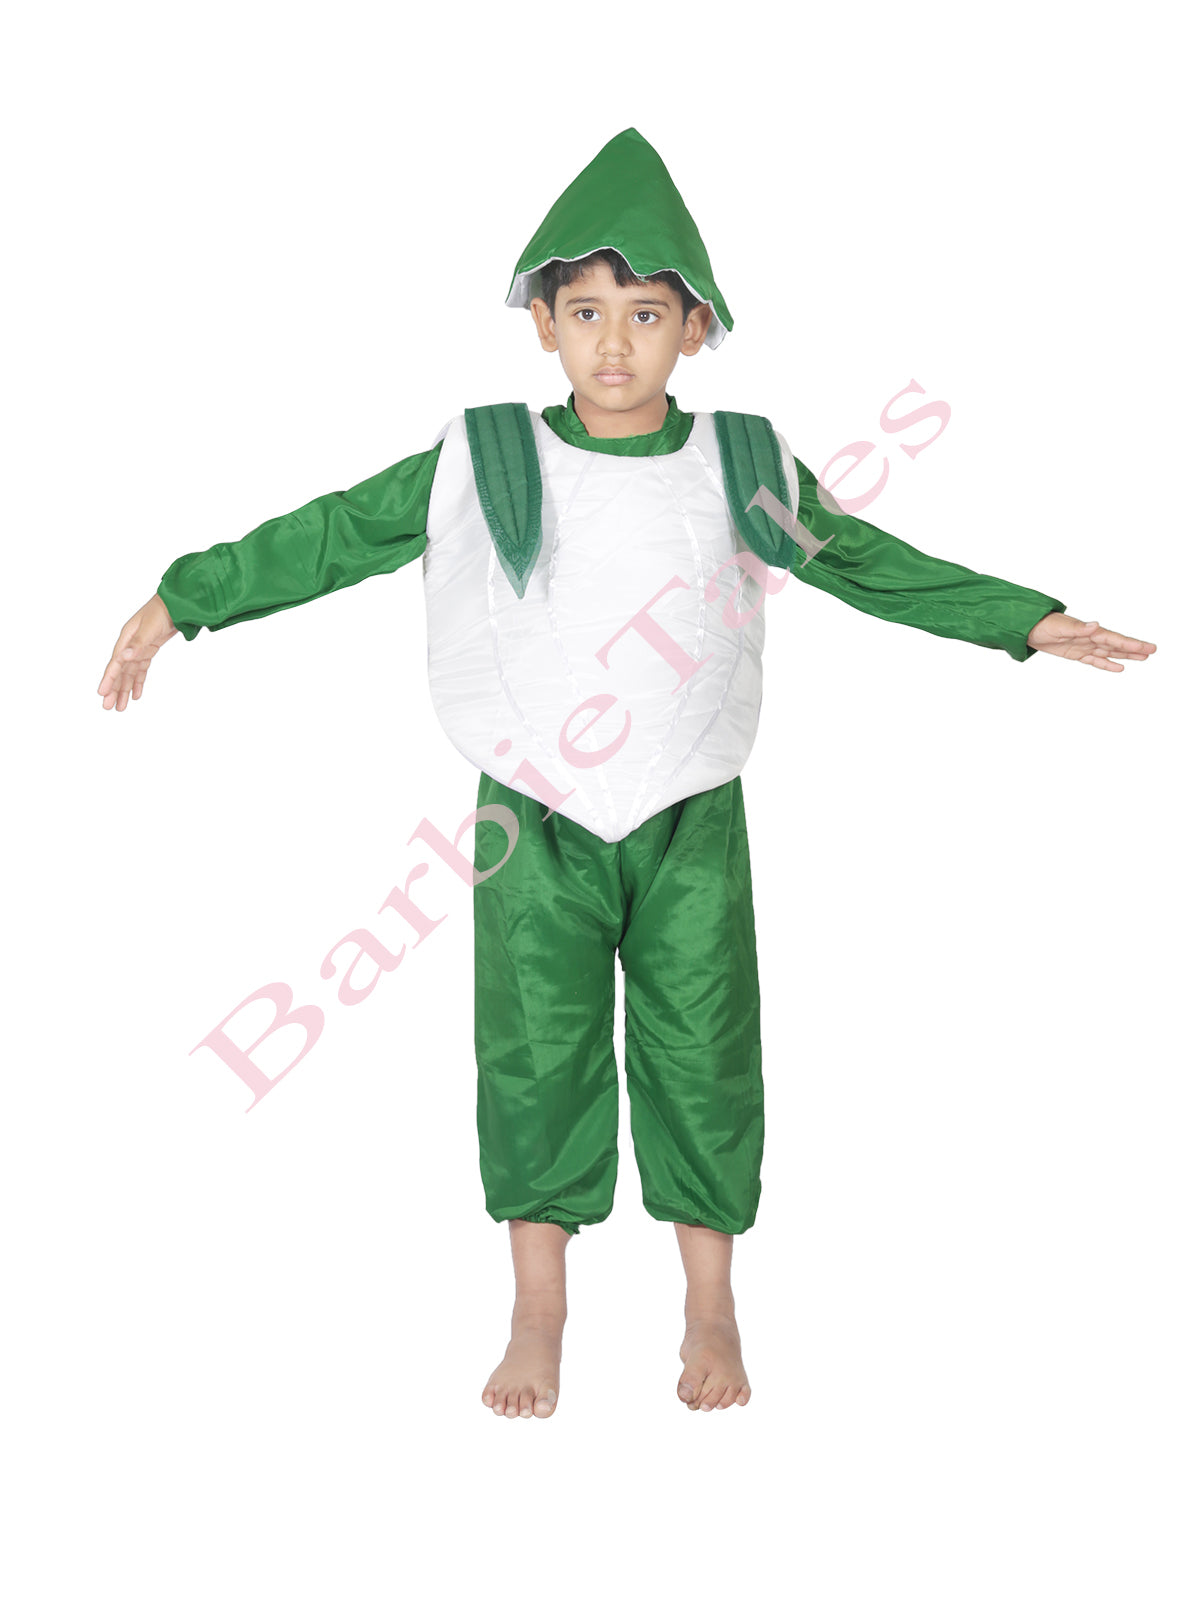 Peas fancy dress for kids,Vegetables Costume for School Annual function/ Theme Party/Competition/Stage Shows Dress